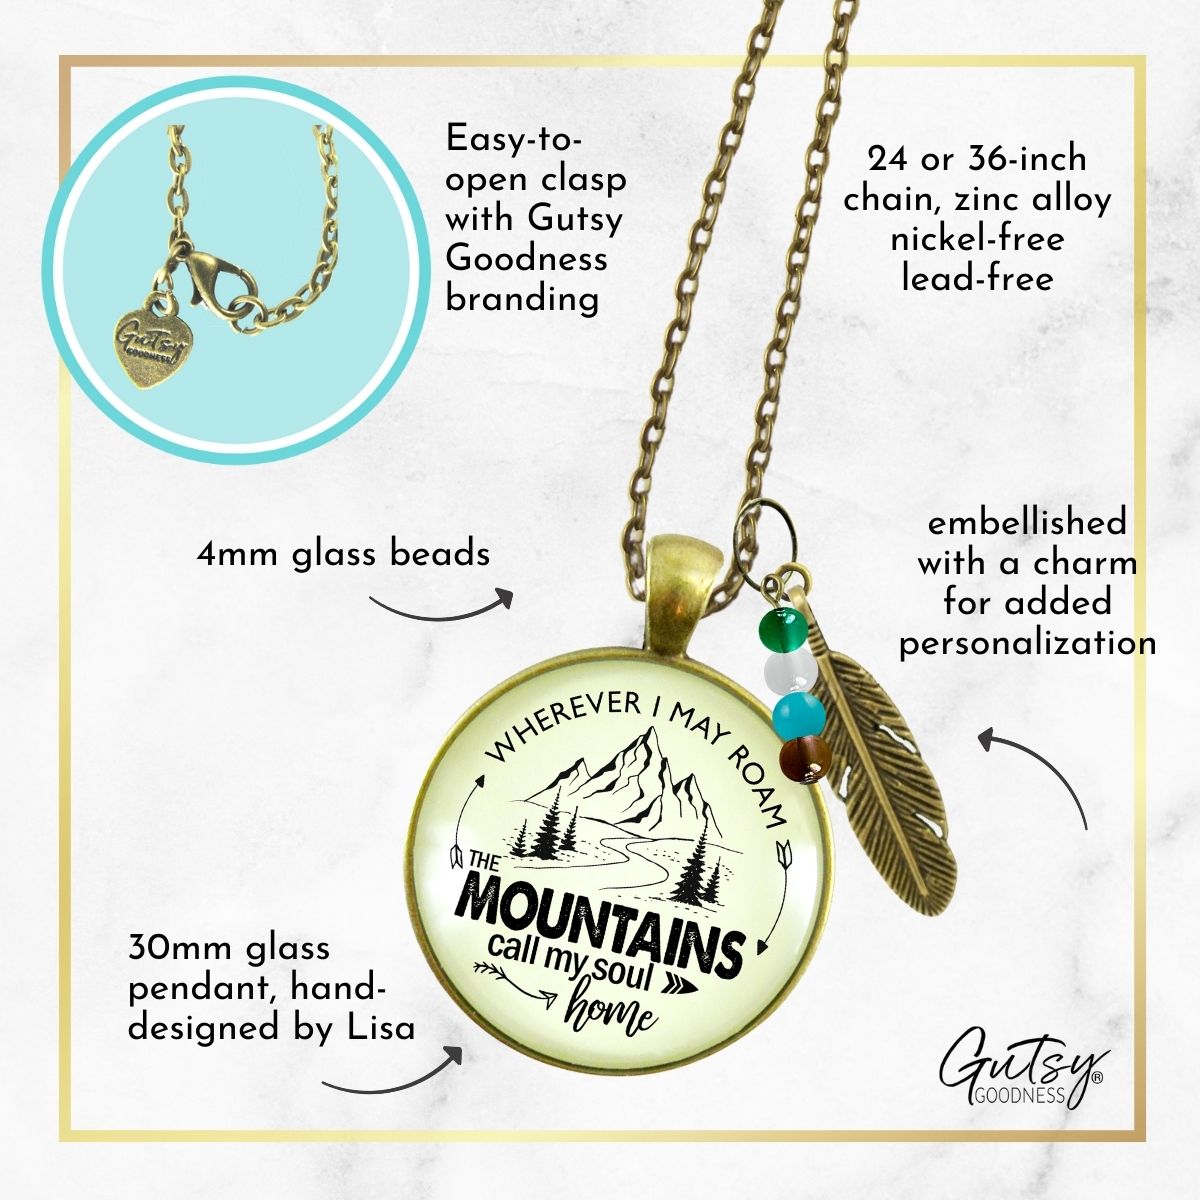 Handmade Gutsy Goodness Jewelry Wherever I Roam The Mountains Call My Soul Home Necklace Nature Theme Jewelry & Message Card